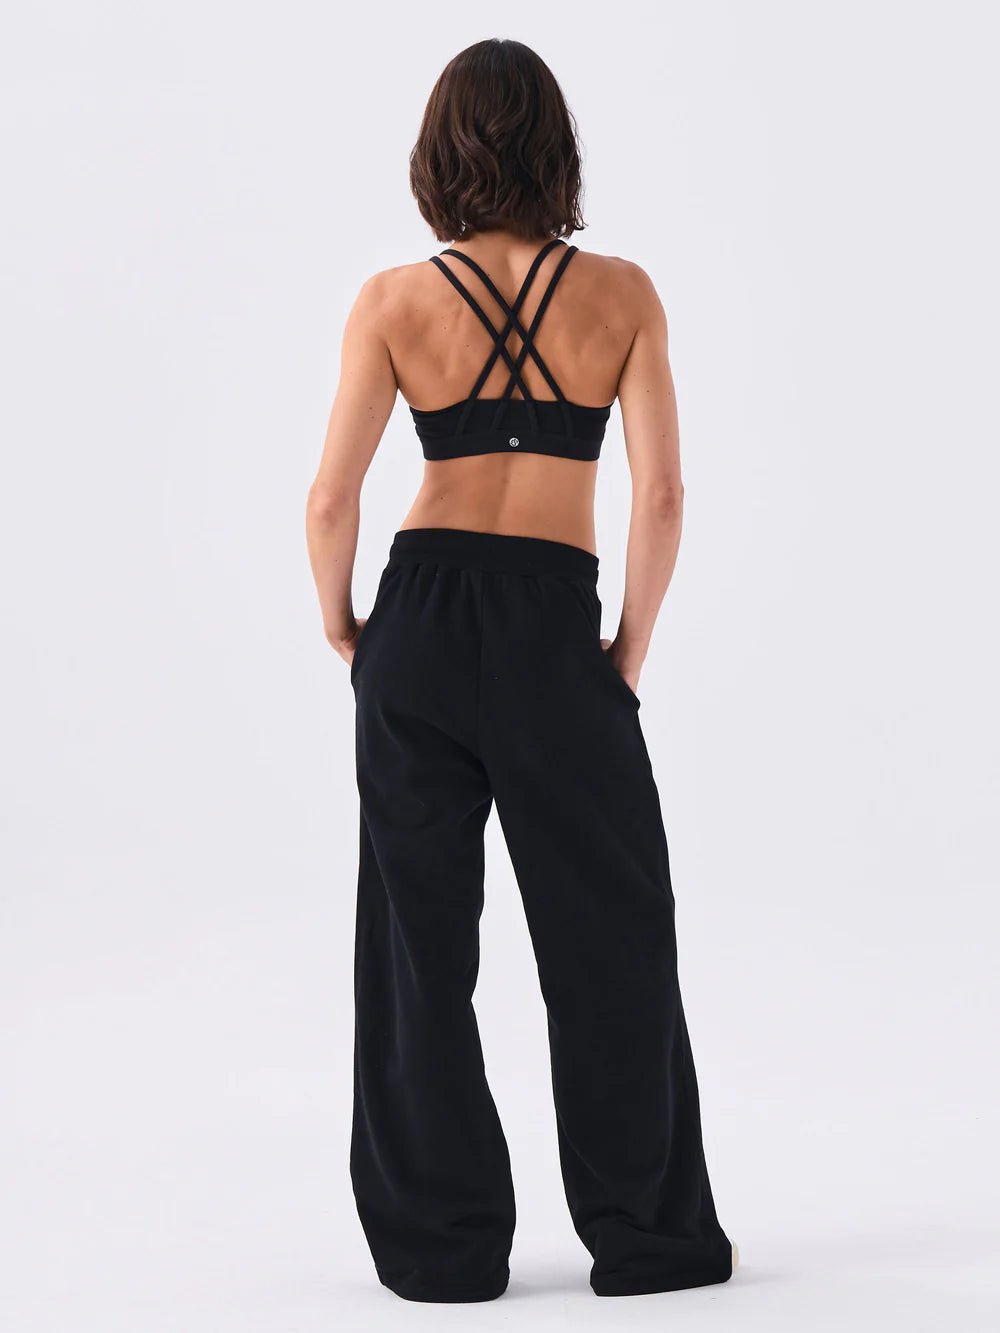 Step up your loungewear game with our trendy black wide-leg sweat pants. Comfort meets fashion effortlessly.